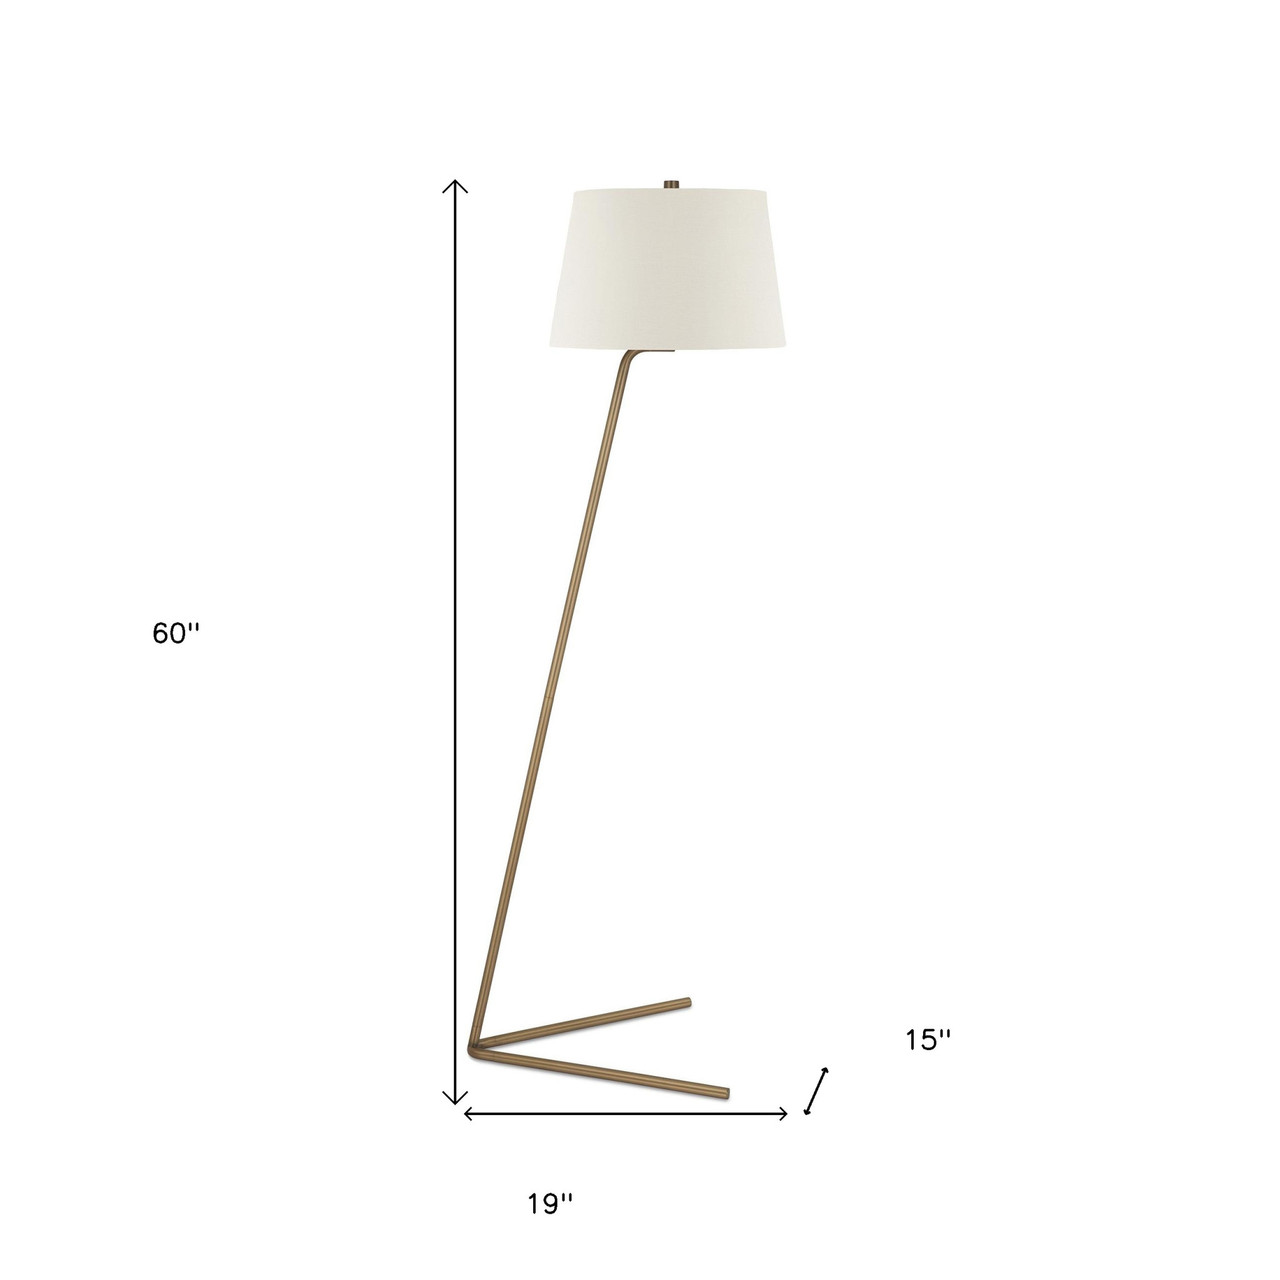 60" Brass Novelty Floor Lamp With White Frosted Glass Drum Shade - CP-HMEROOTS-523458